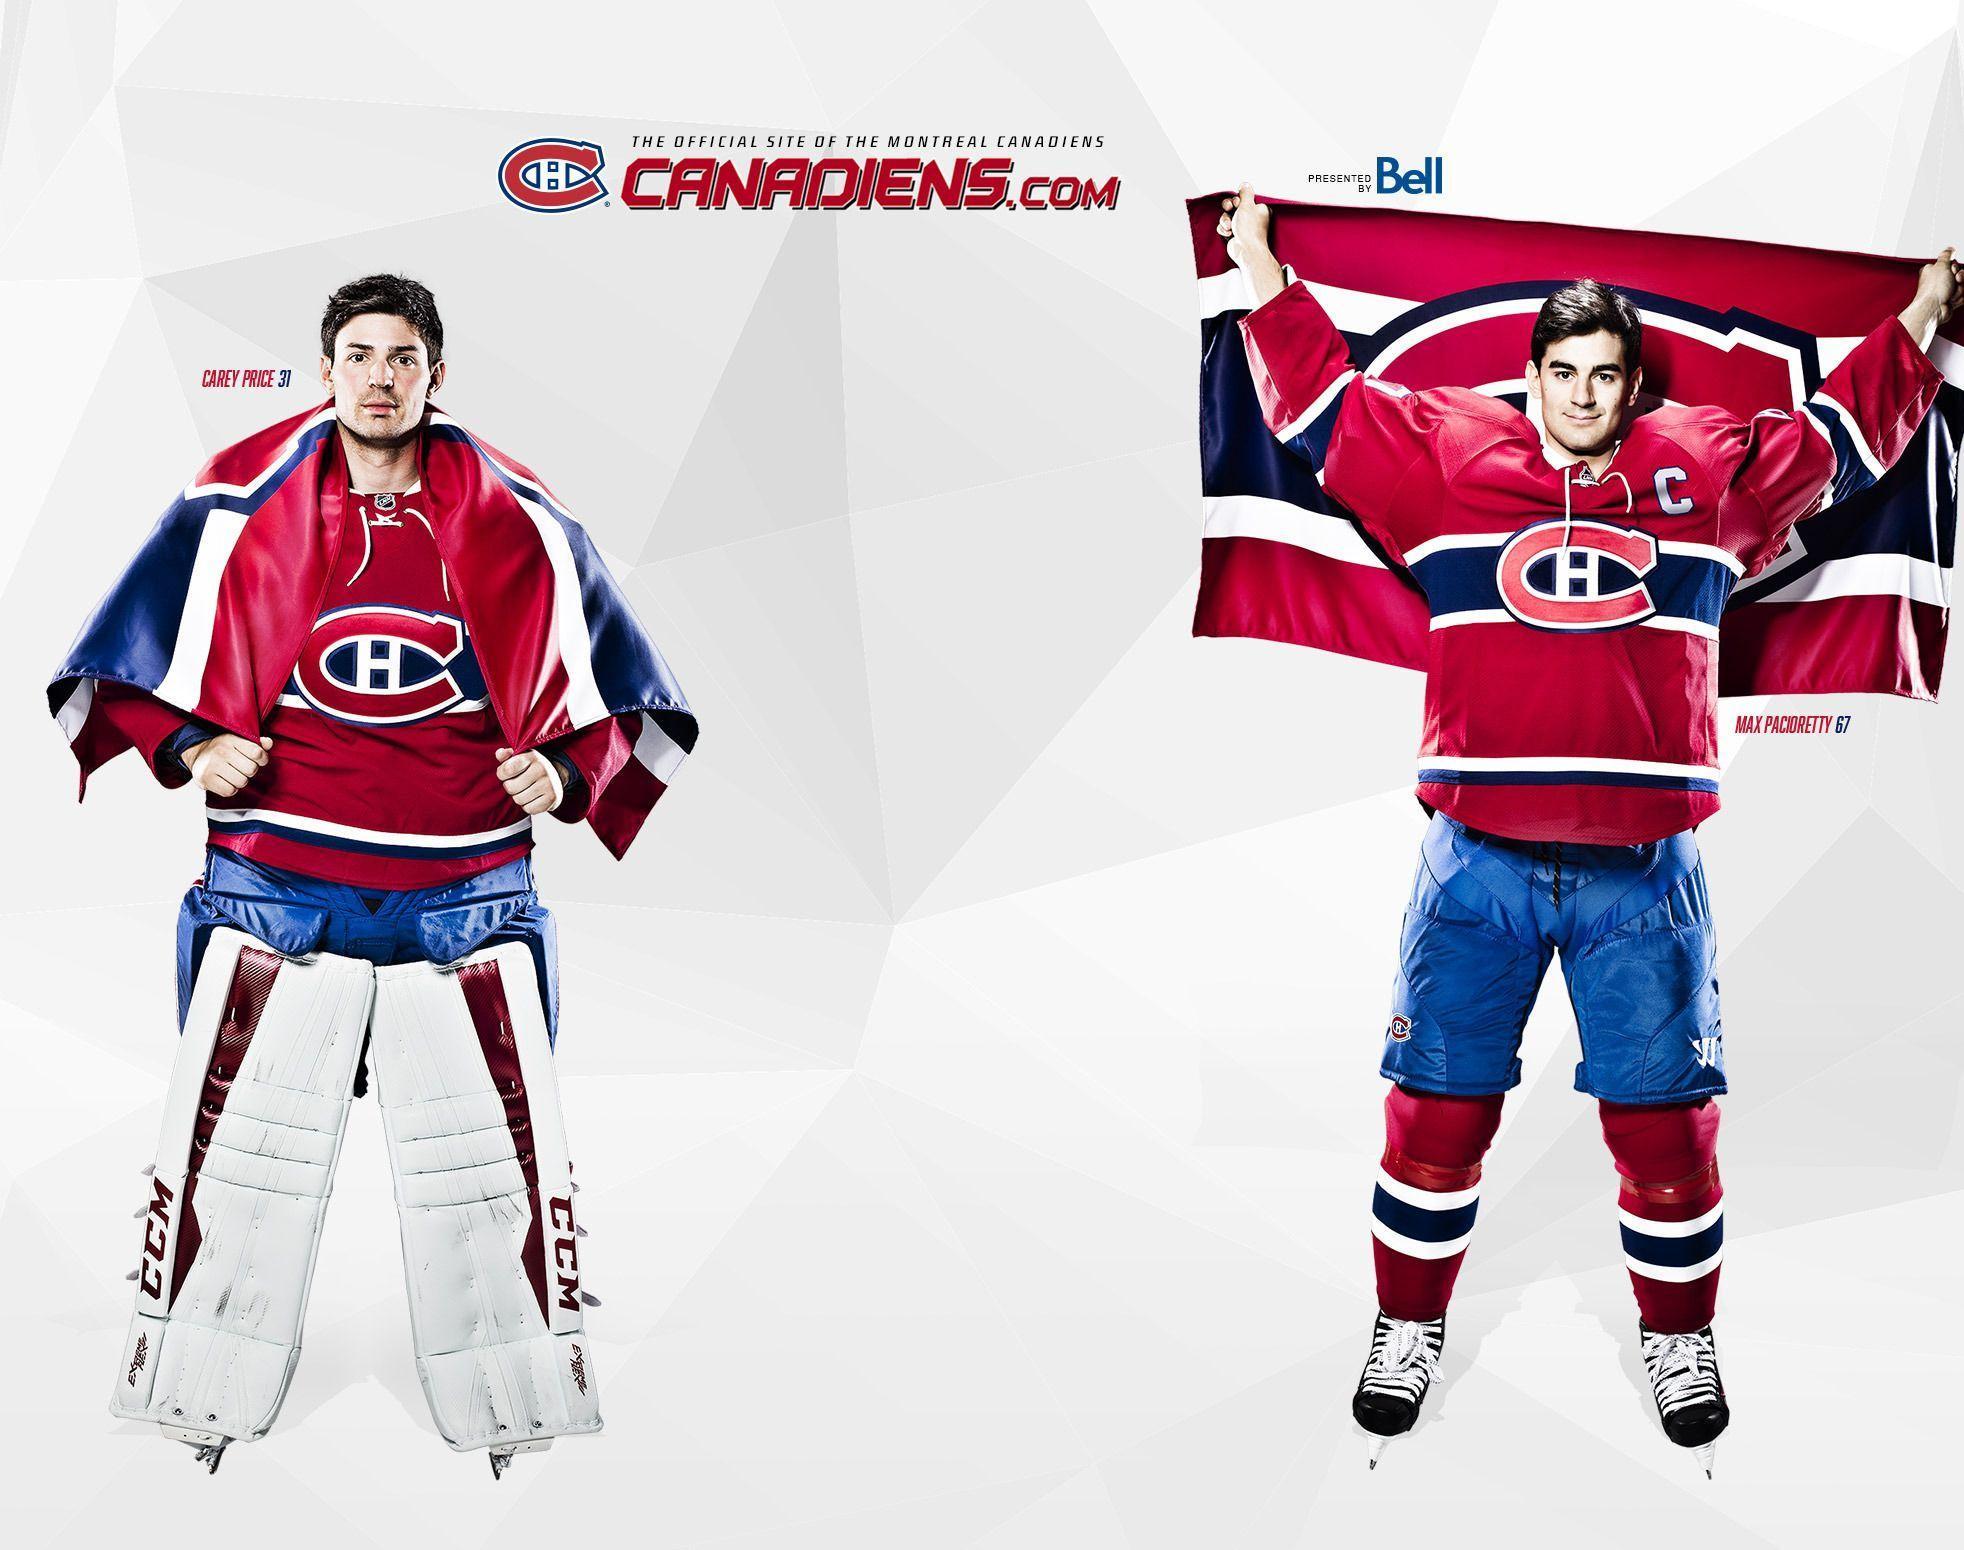 Anyone Have A Copy Of The Photo Used In The R Habs Banner? Price